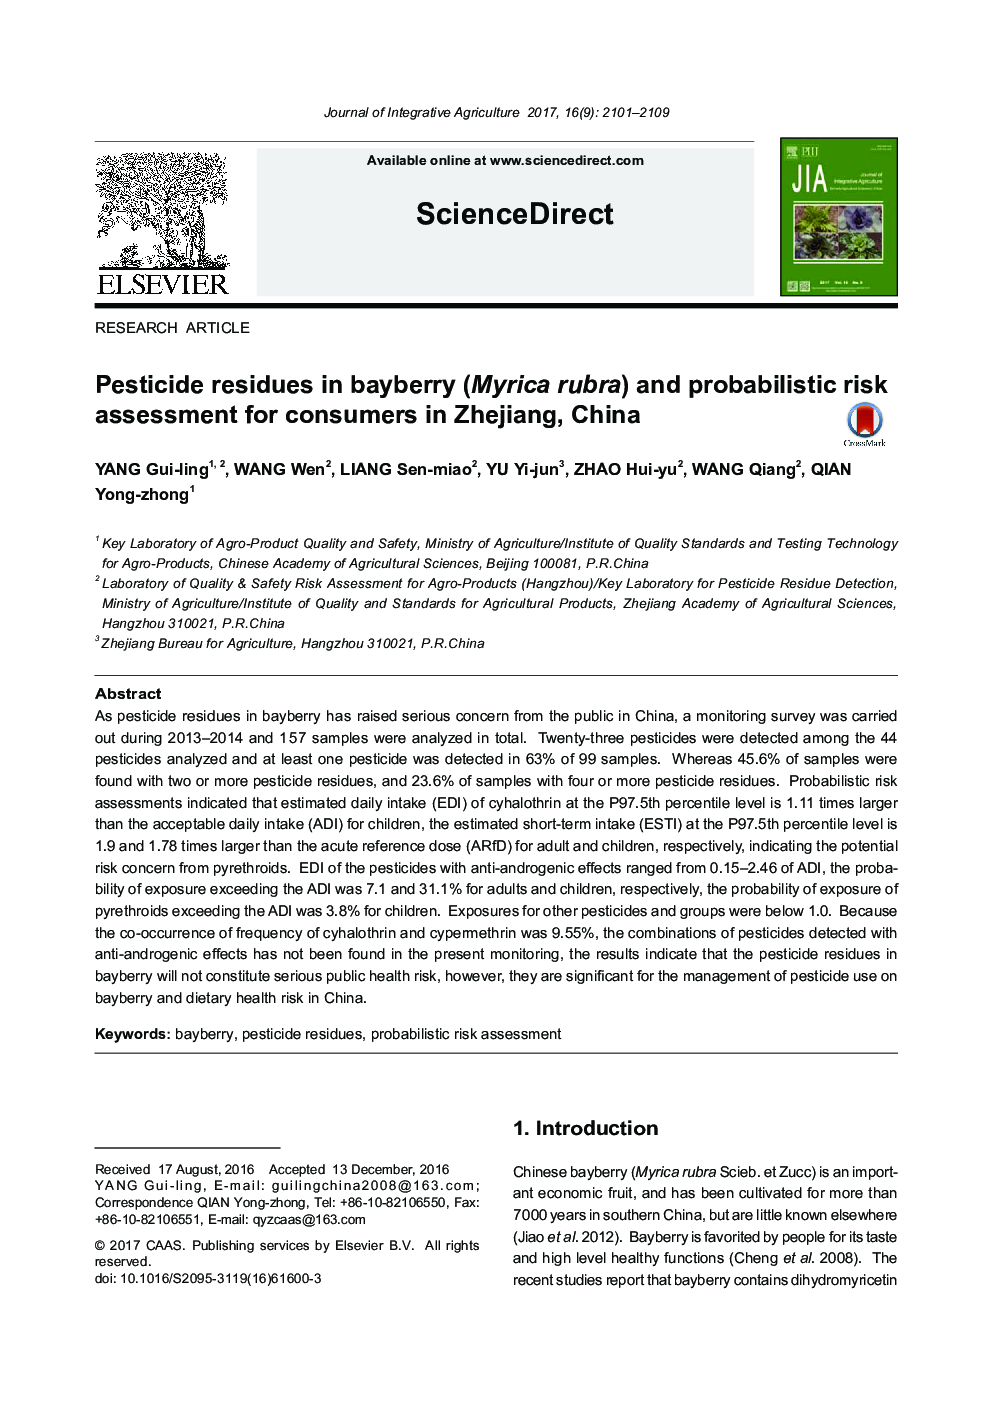 Pesticide residues in bayberry (Myrica rubra) and probabilistic risk assessment for consumers in Zhejiang, China